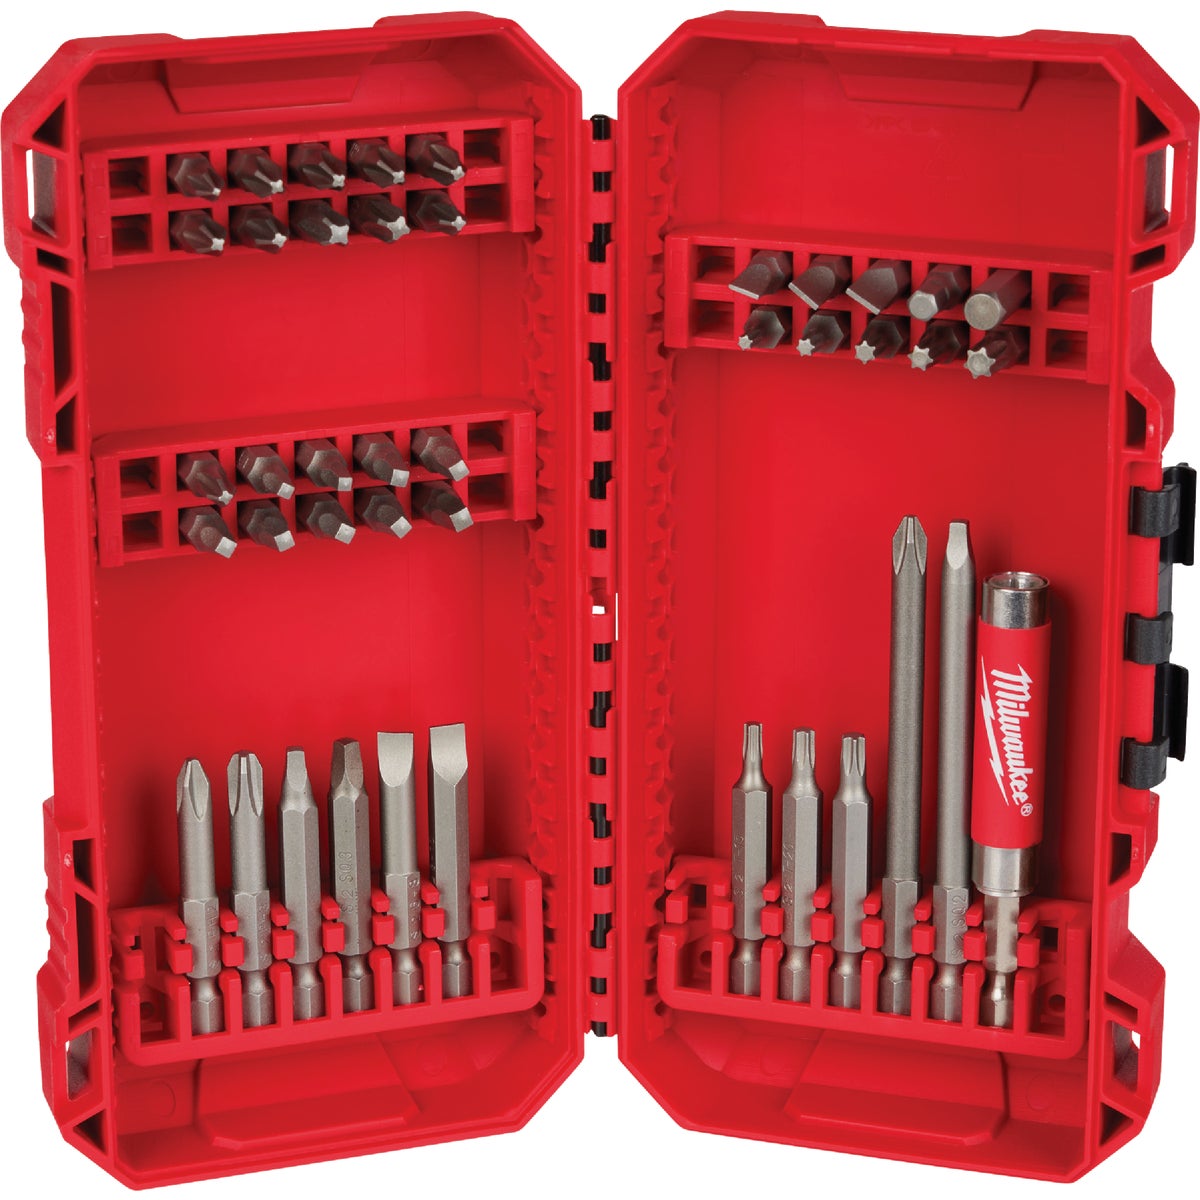 Item 303582, The MILWAUKEE 42-Piece Driver Bit Set provides solutions for fastening 